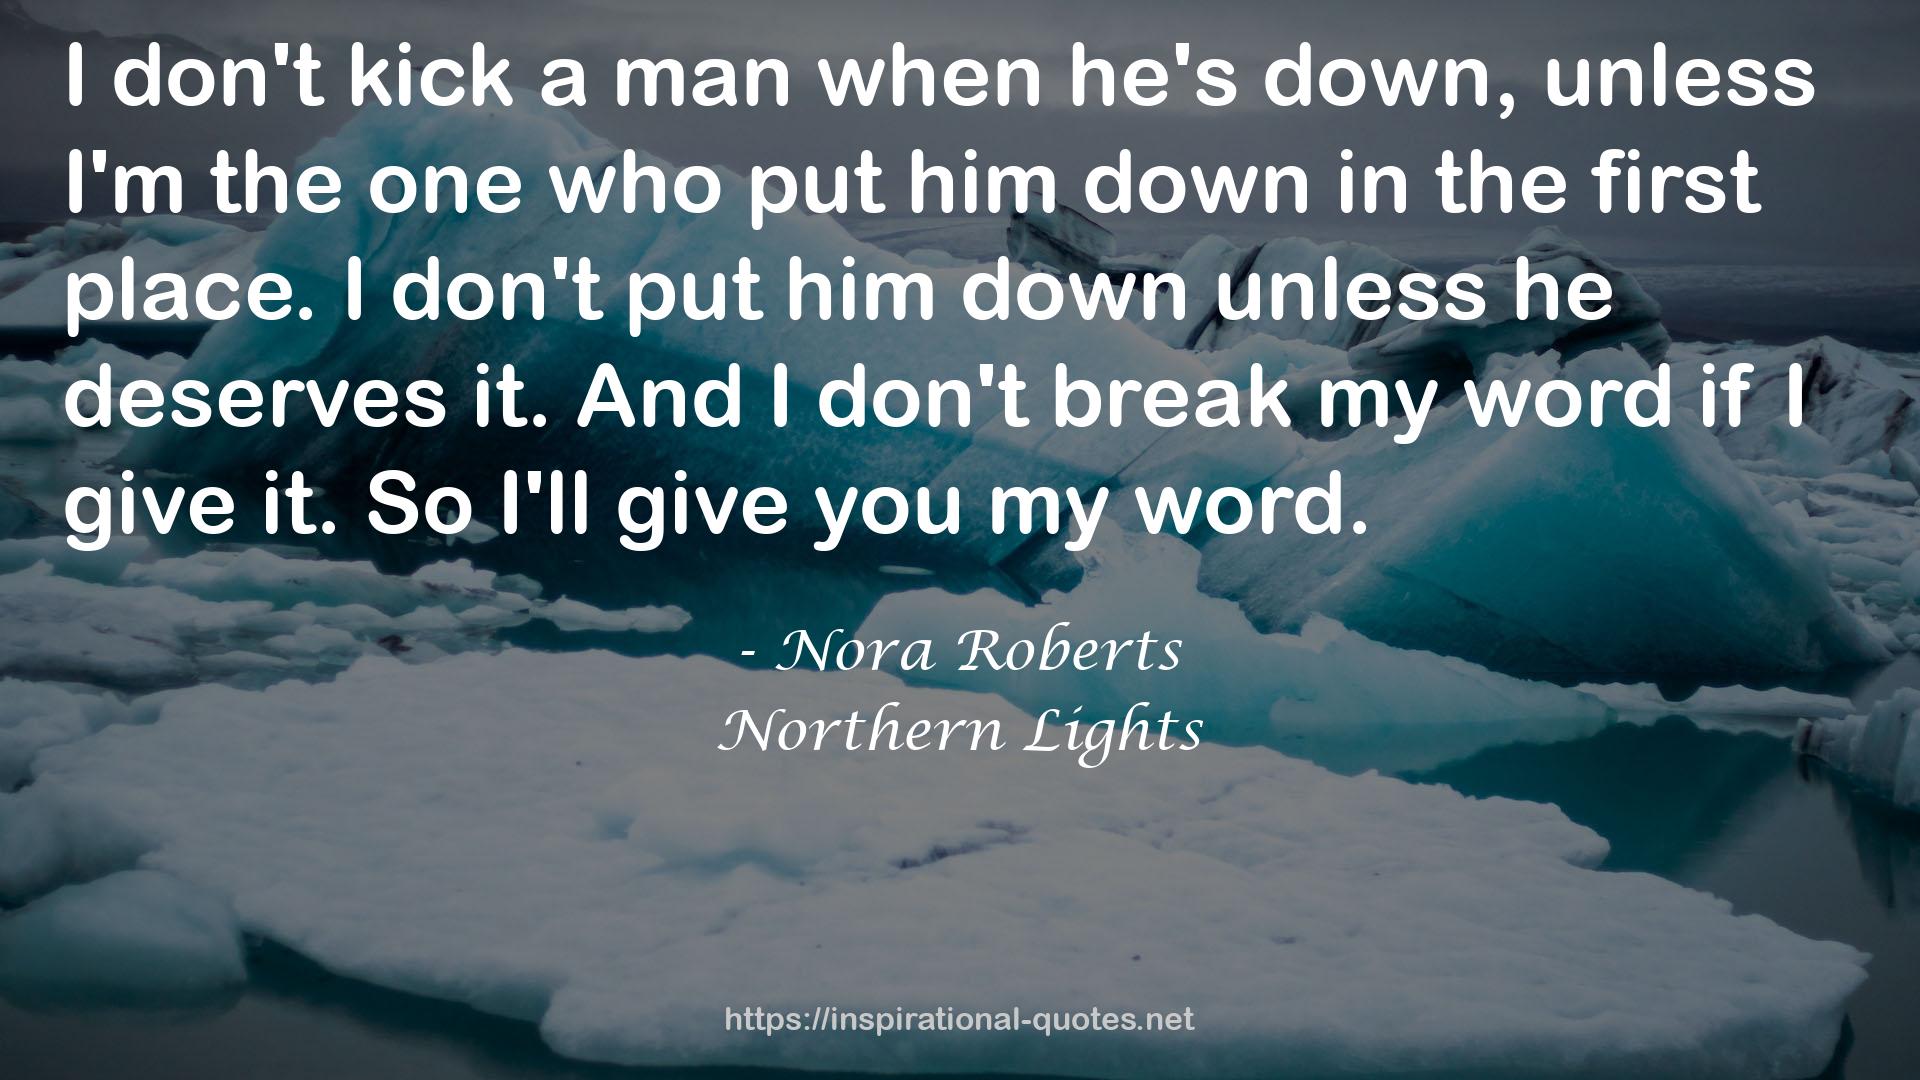 Northern Lights QUOTES